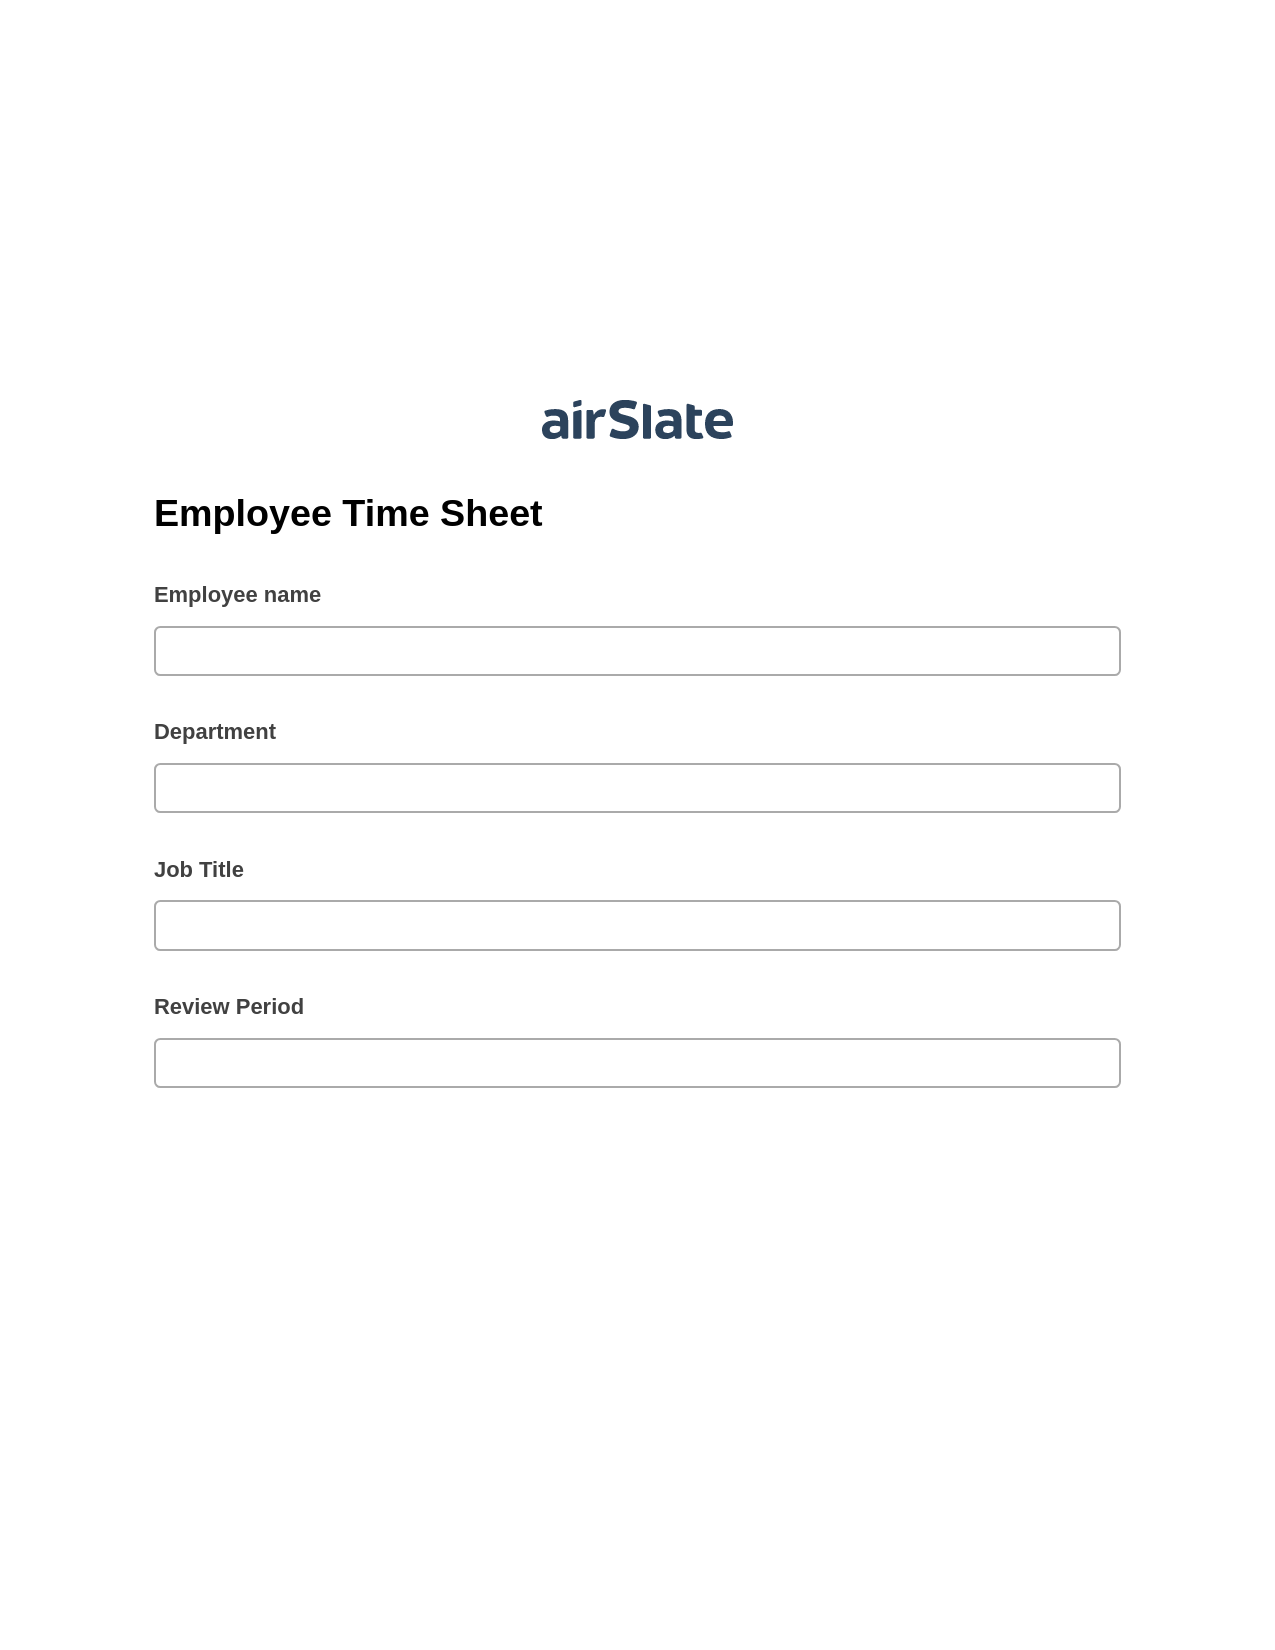 Multirole Employee Time Sheet Pre-fill from Office 365 Excel Bot, Slack Notification Bot, Export to Excel 365 Bot